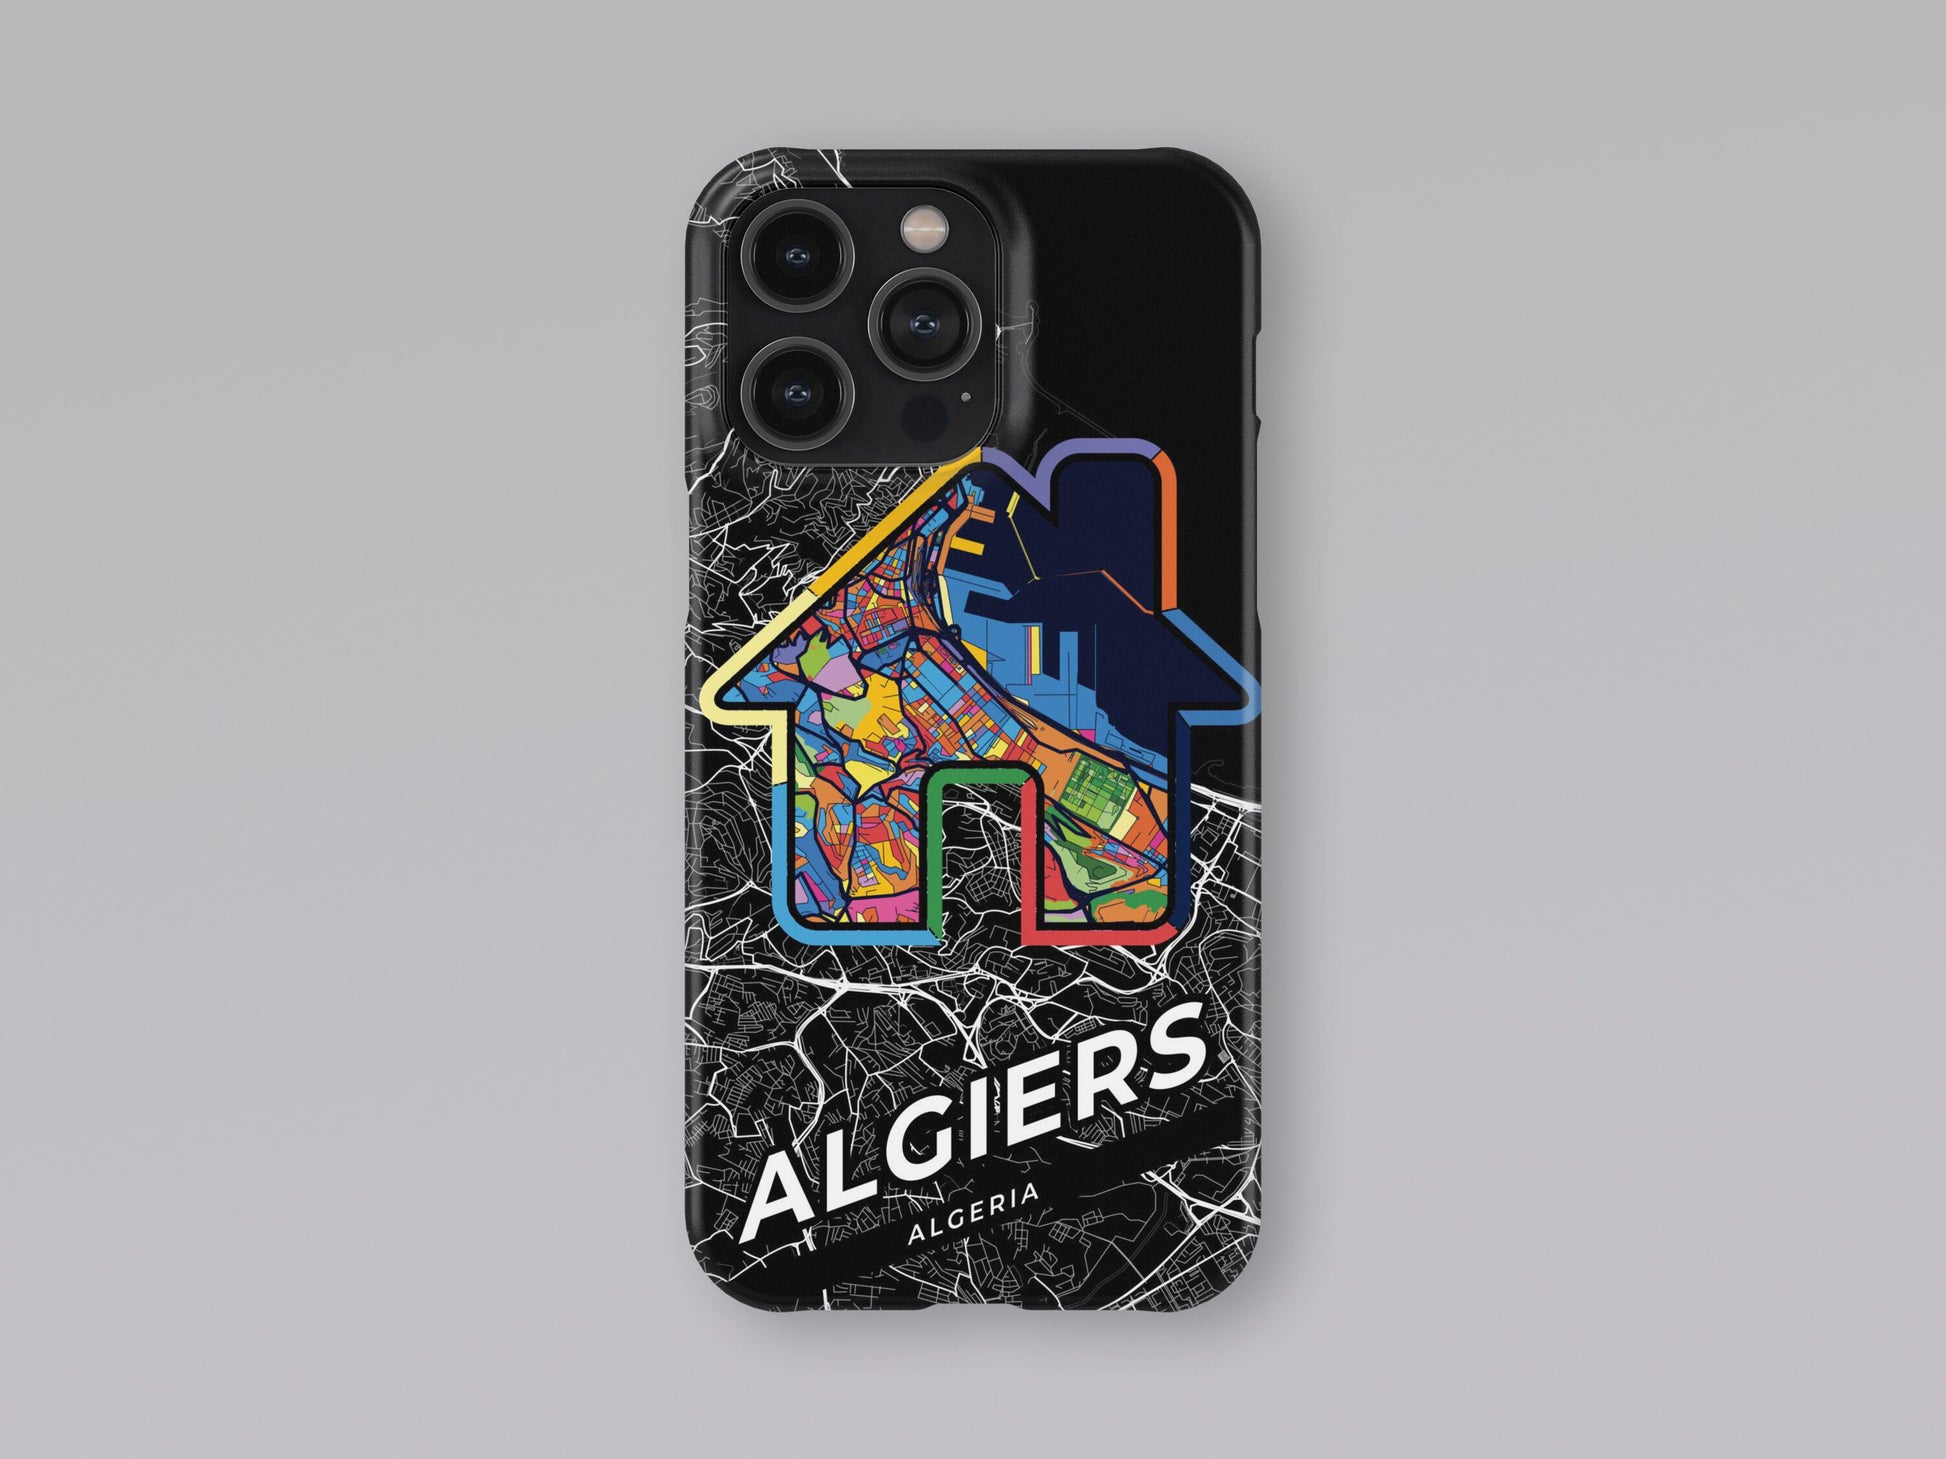 Algiers Algeria slim phone case with colorful icon. Birthday, wedding or housewarming gift. Couple match cases. 3